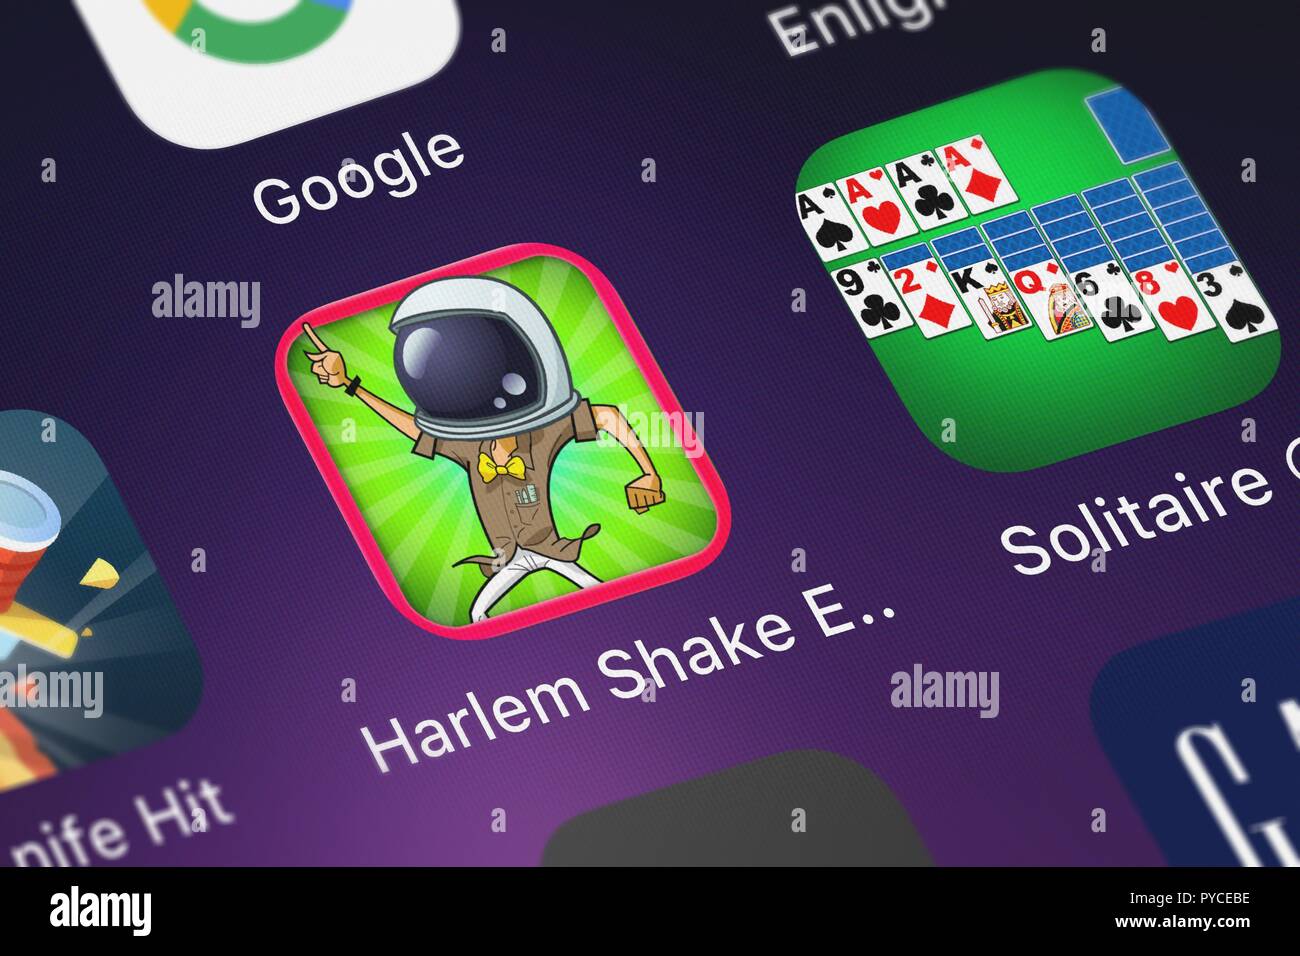 London, United Kingdom - October 26, 2018: Screenshot of the Harlem Shake EZ Video Maker mobile app from Psycho Bear Studios icon on an iPhone. Stock Photo